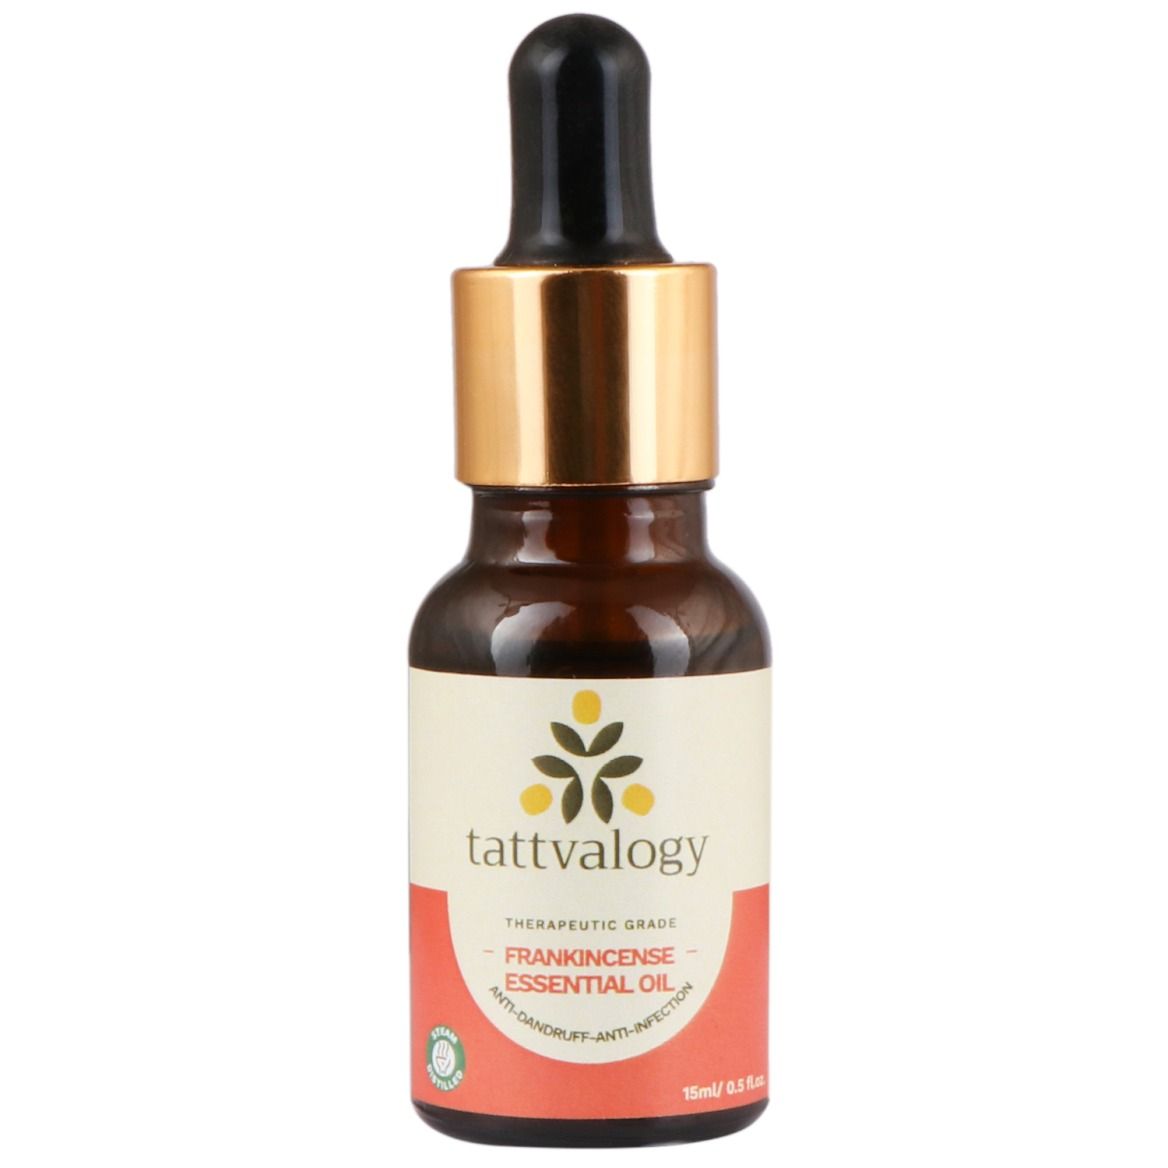 Tattvalogy Frankincense Essential Oil, Antii-Infection - Antifungal for Skin Therapy